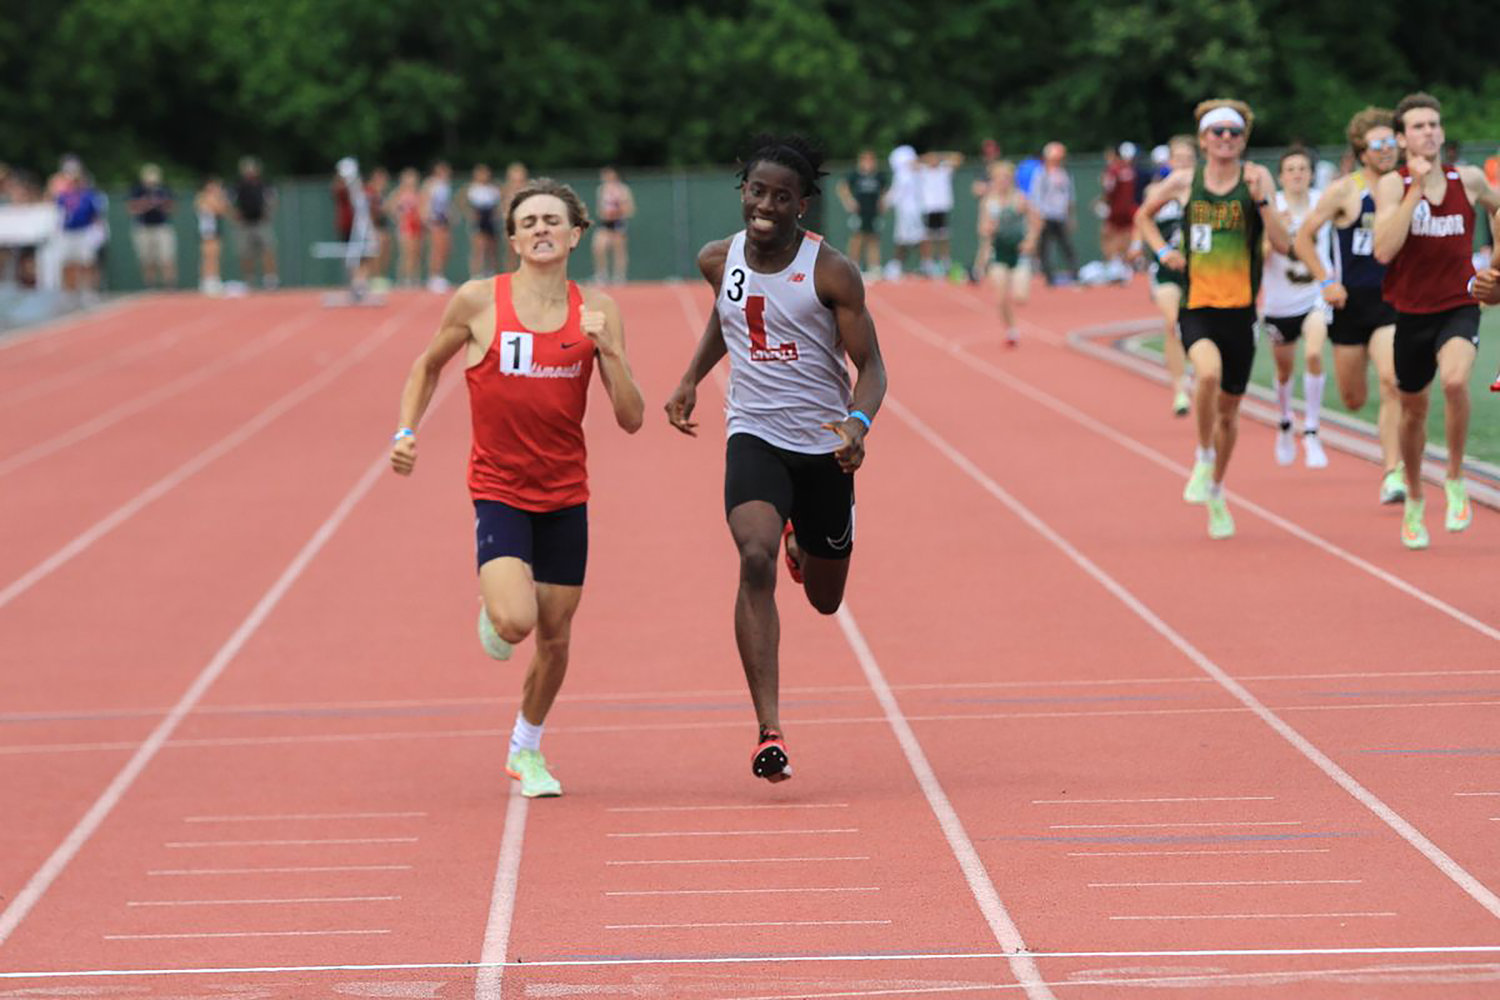 The Patriots’ Kaden Kluth (left) became the first-ever boys’ New England champion from Portsmouth High School when he won the 800-meter race in a time of 1:52.45 during the New England Interscholastic Outdoor Track and Field Championship held June 11 in New Britain, Conn. At right is the second-place finisher, David Vandi of Lowell, Mass.